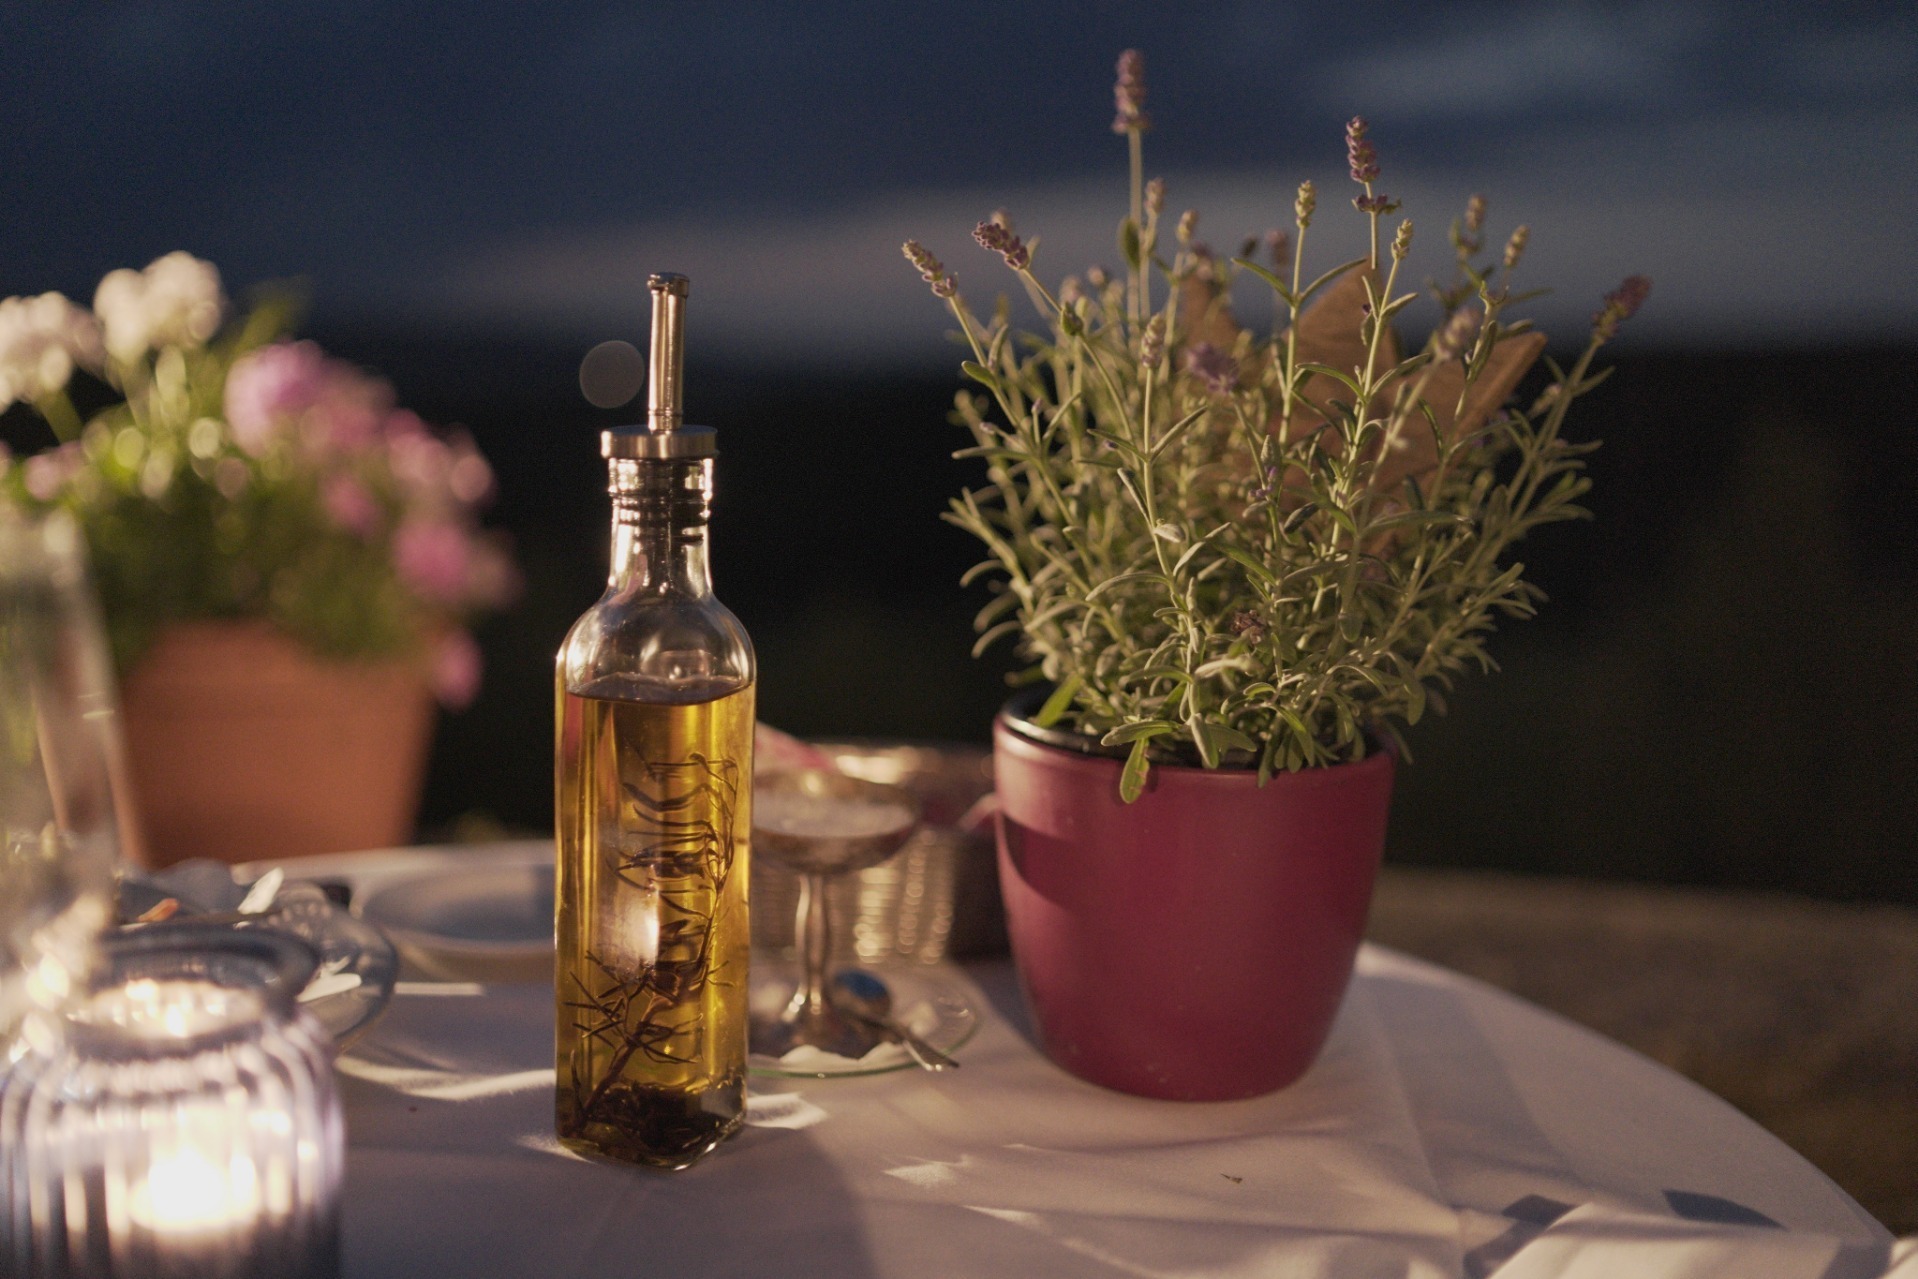 A bottle of Extra Virgin Olive Oil on a table ready to be eaten as a Superfood.